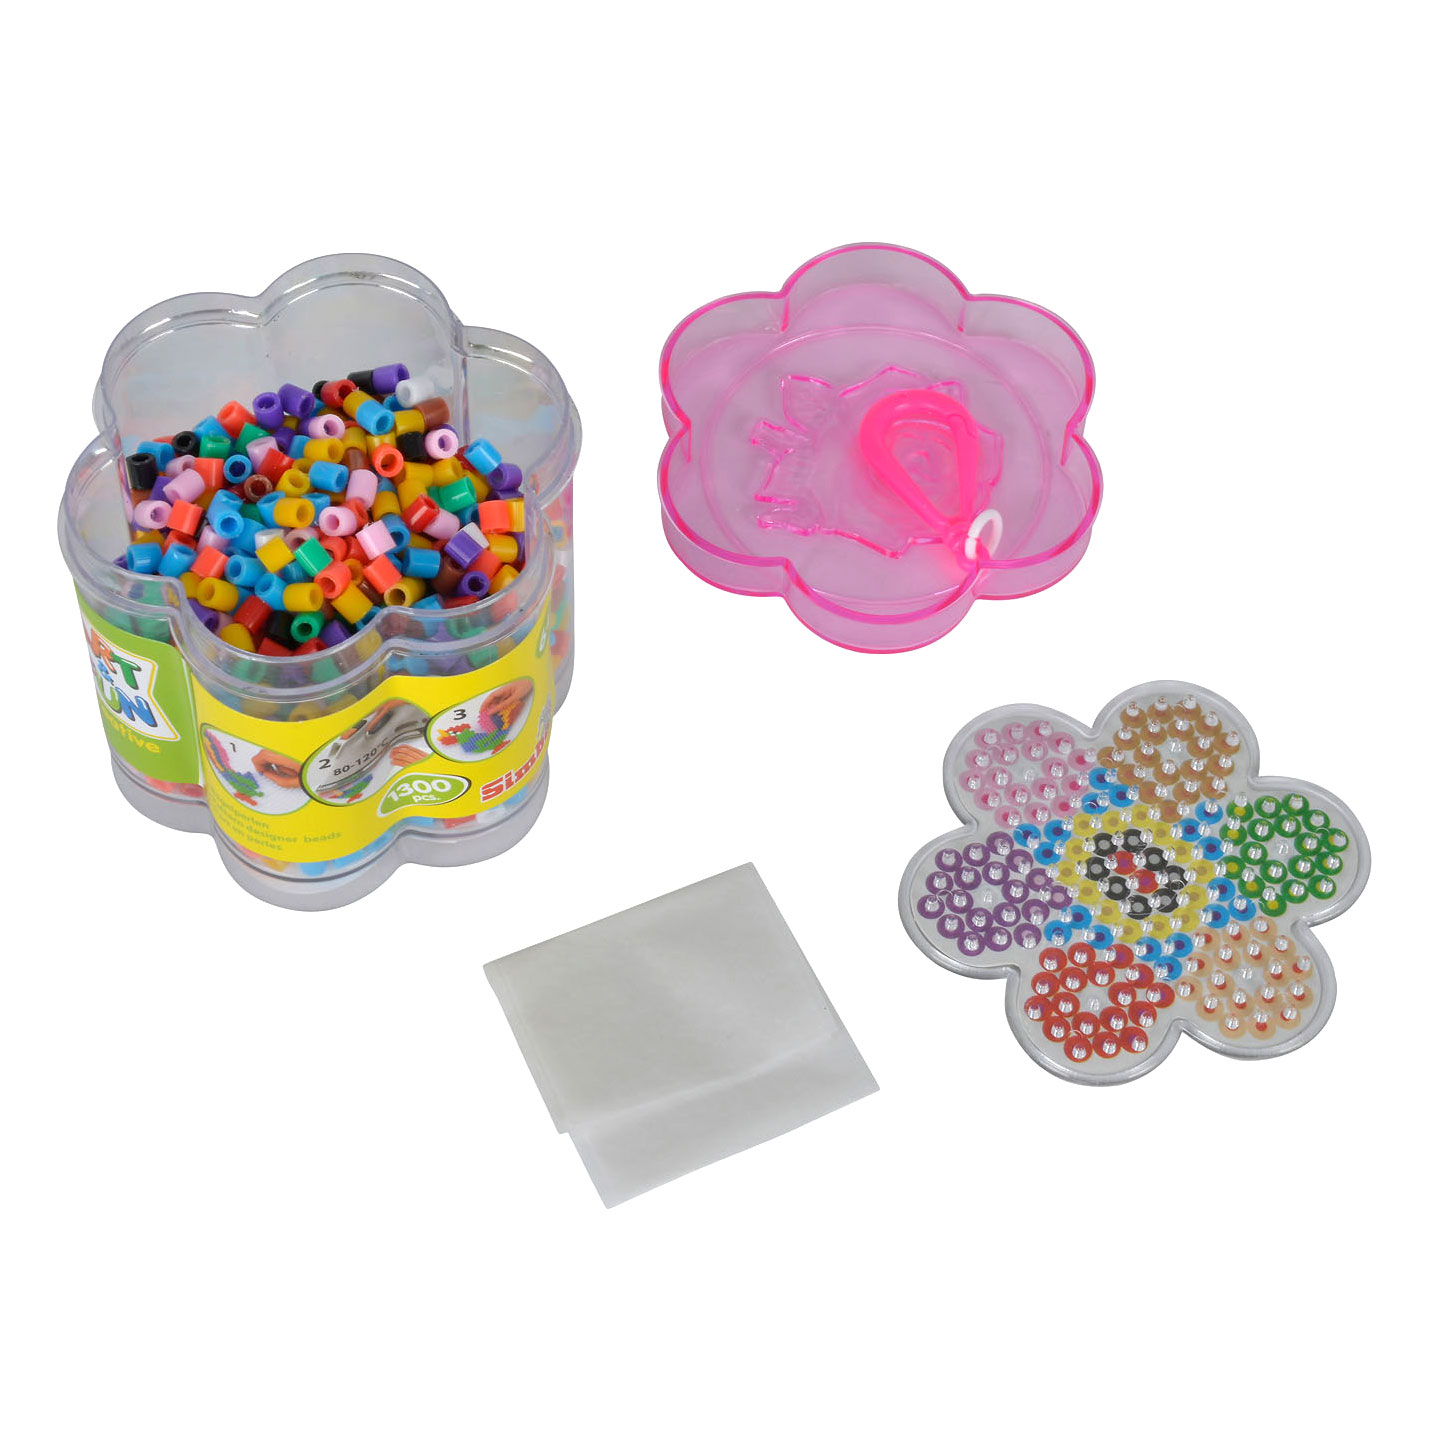 Fuse Beads, 23,000 pcs Multicolor Fuse Beads Kit for Kids Crafts